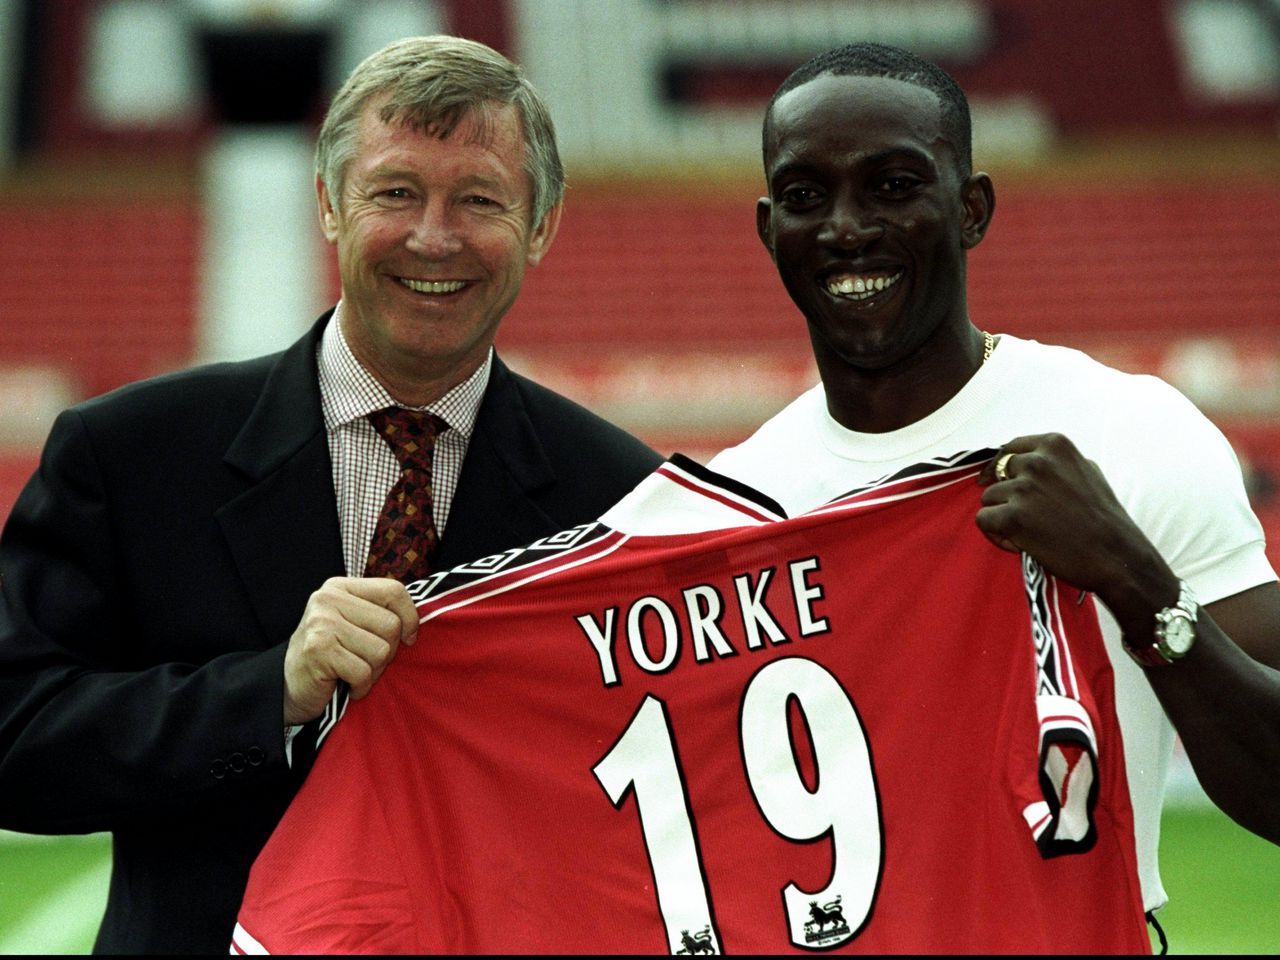 20 years since Dwight Yorke signed for 